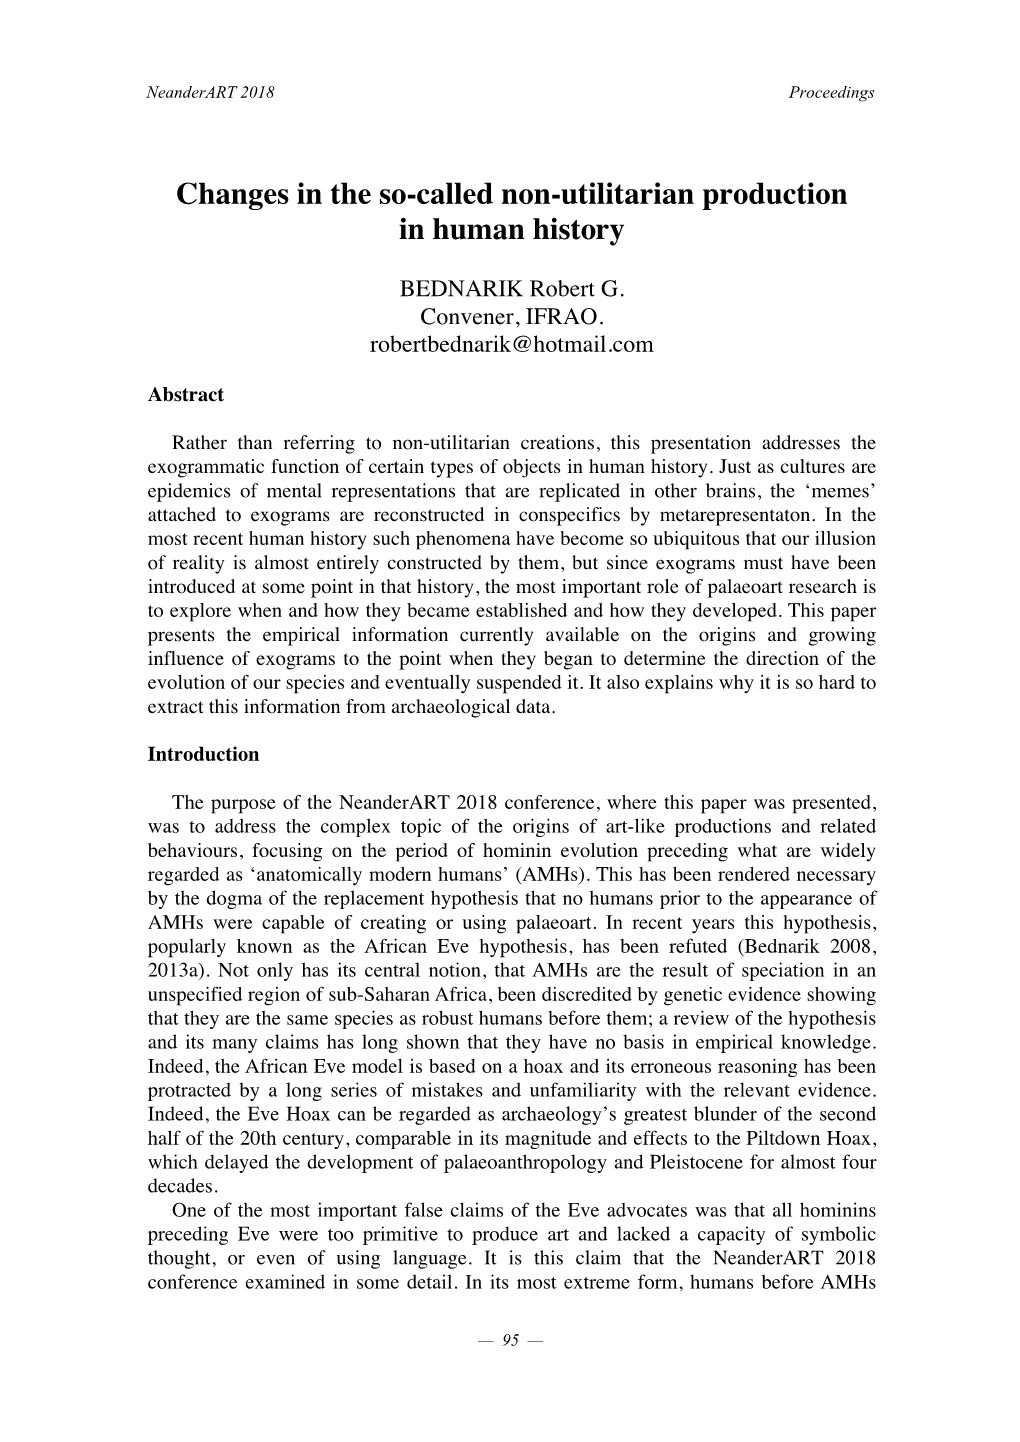 Changes in the So-Called Non-Utilitarian Production in Human History